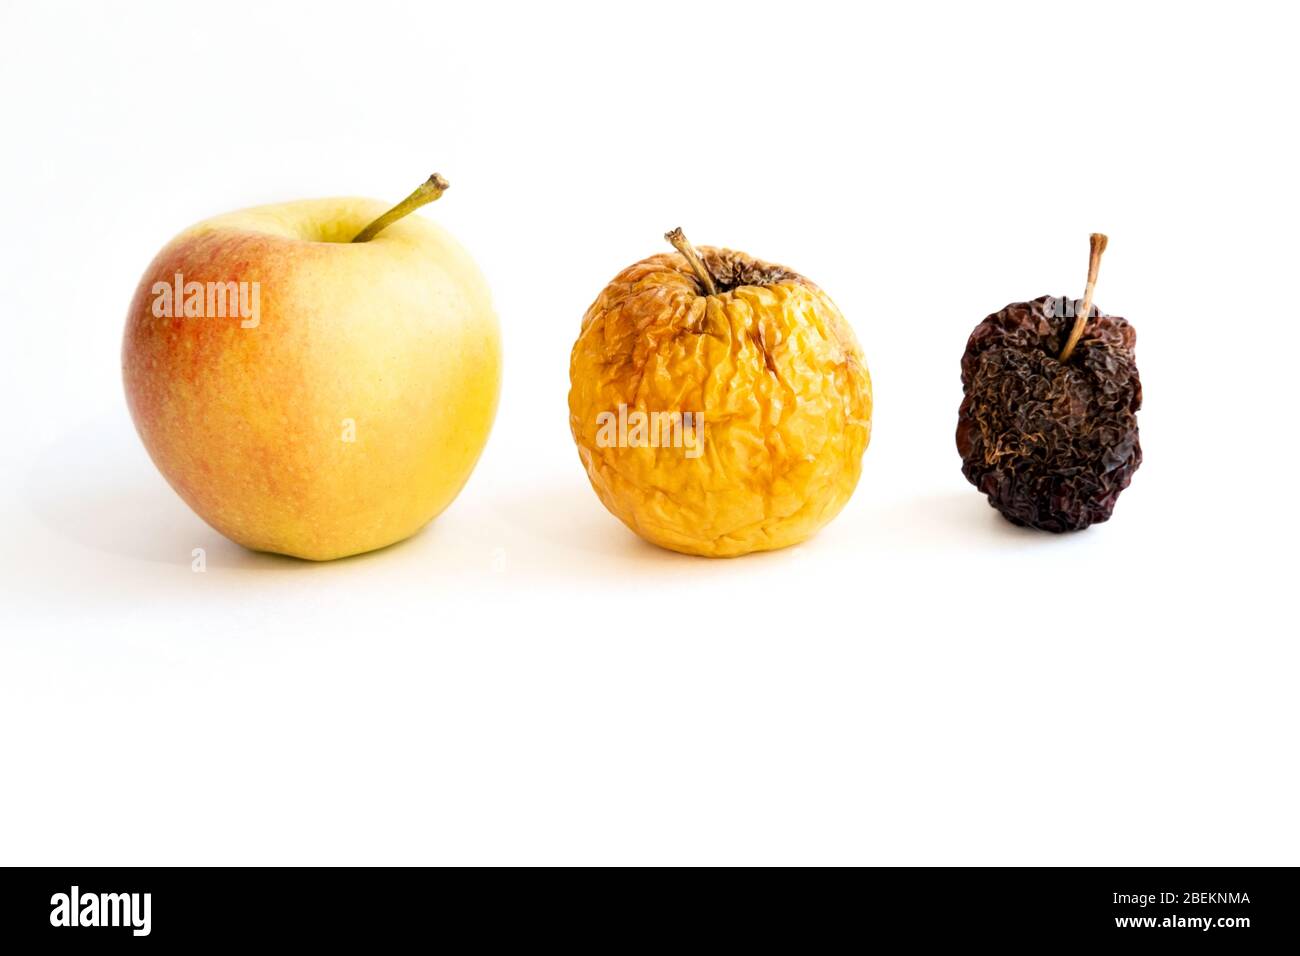 Three apples: young, old, dead. Concept of aging of human skin of different ages. On white background. Isolate. Stock Photo